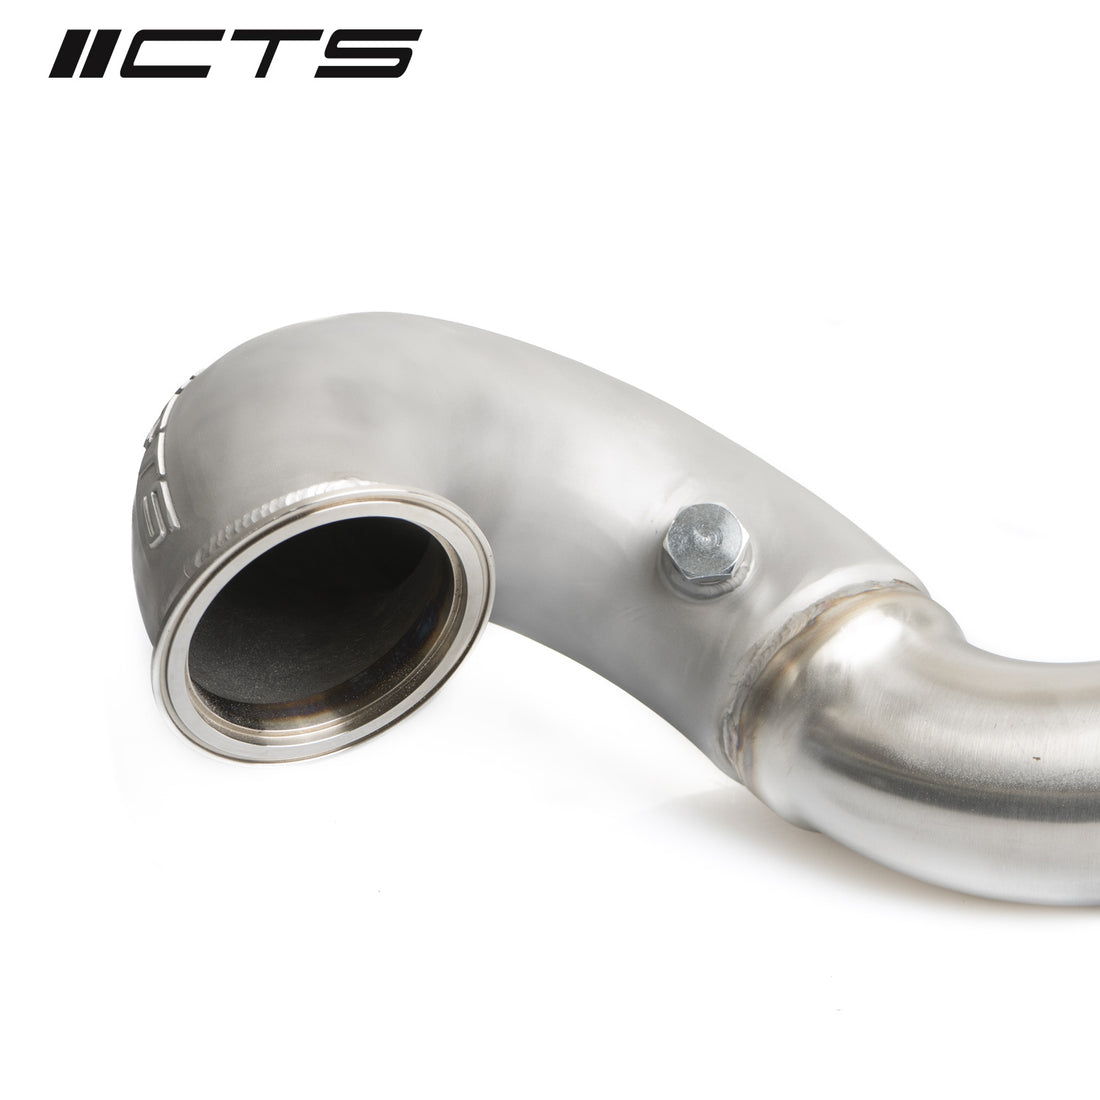 CTS Turbo MQB FWD Exhaust Downpipe with HIGH FLOW CAT (MK7/MK7.5 Golf; GTI; GLI; A3 FWD) CTS Turbo EXH-DP-0014-CAT